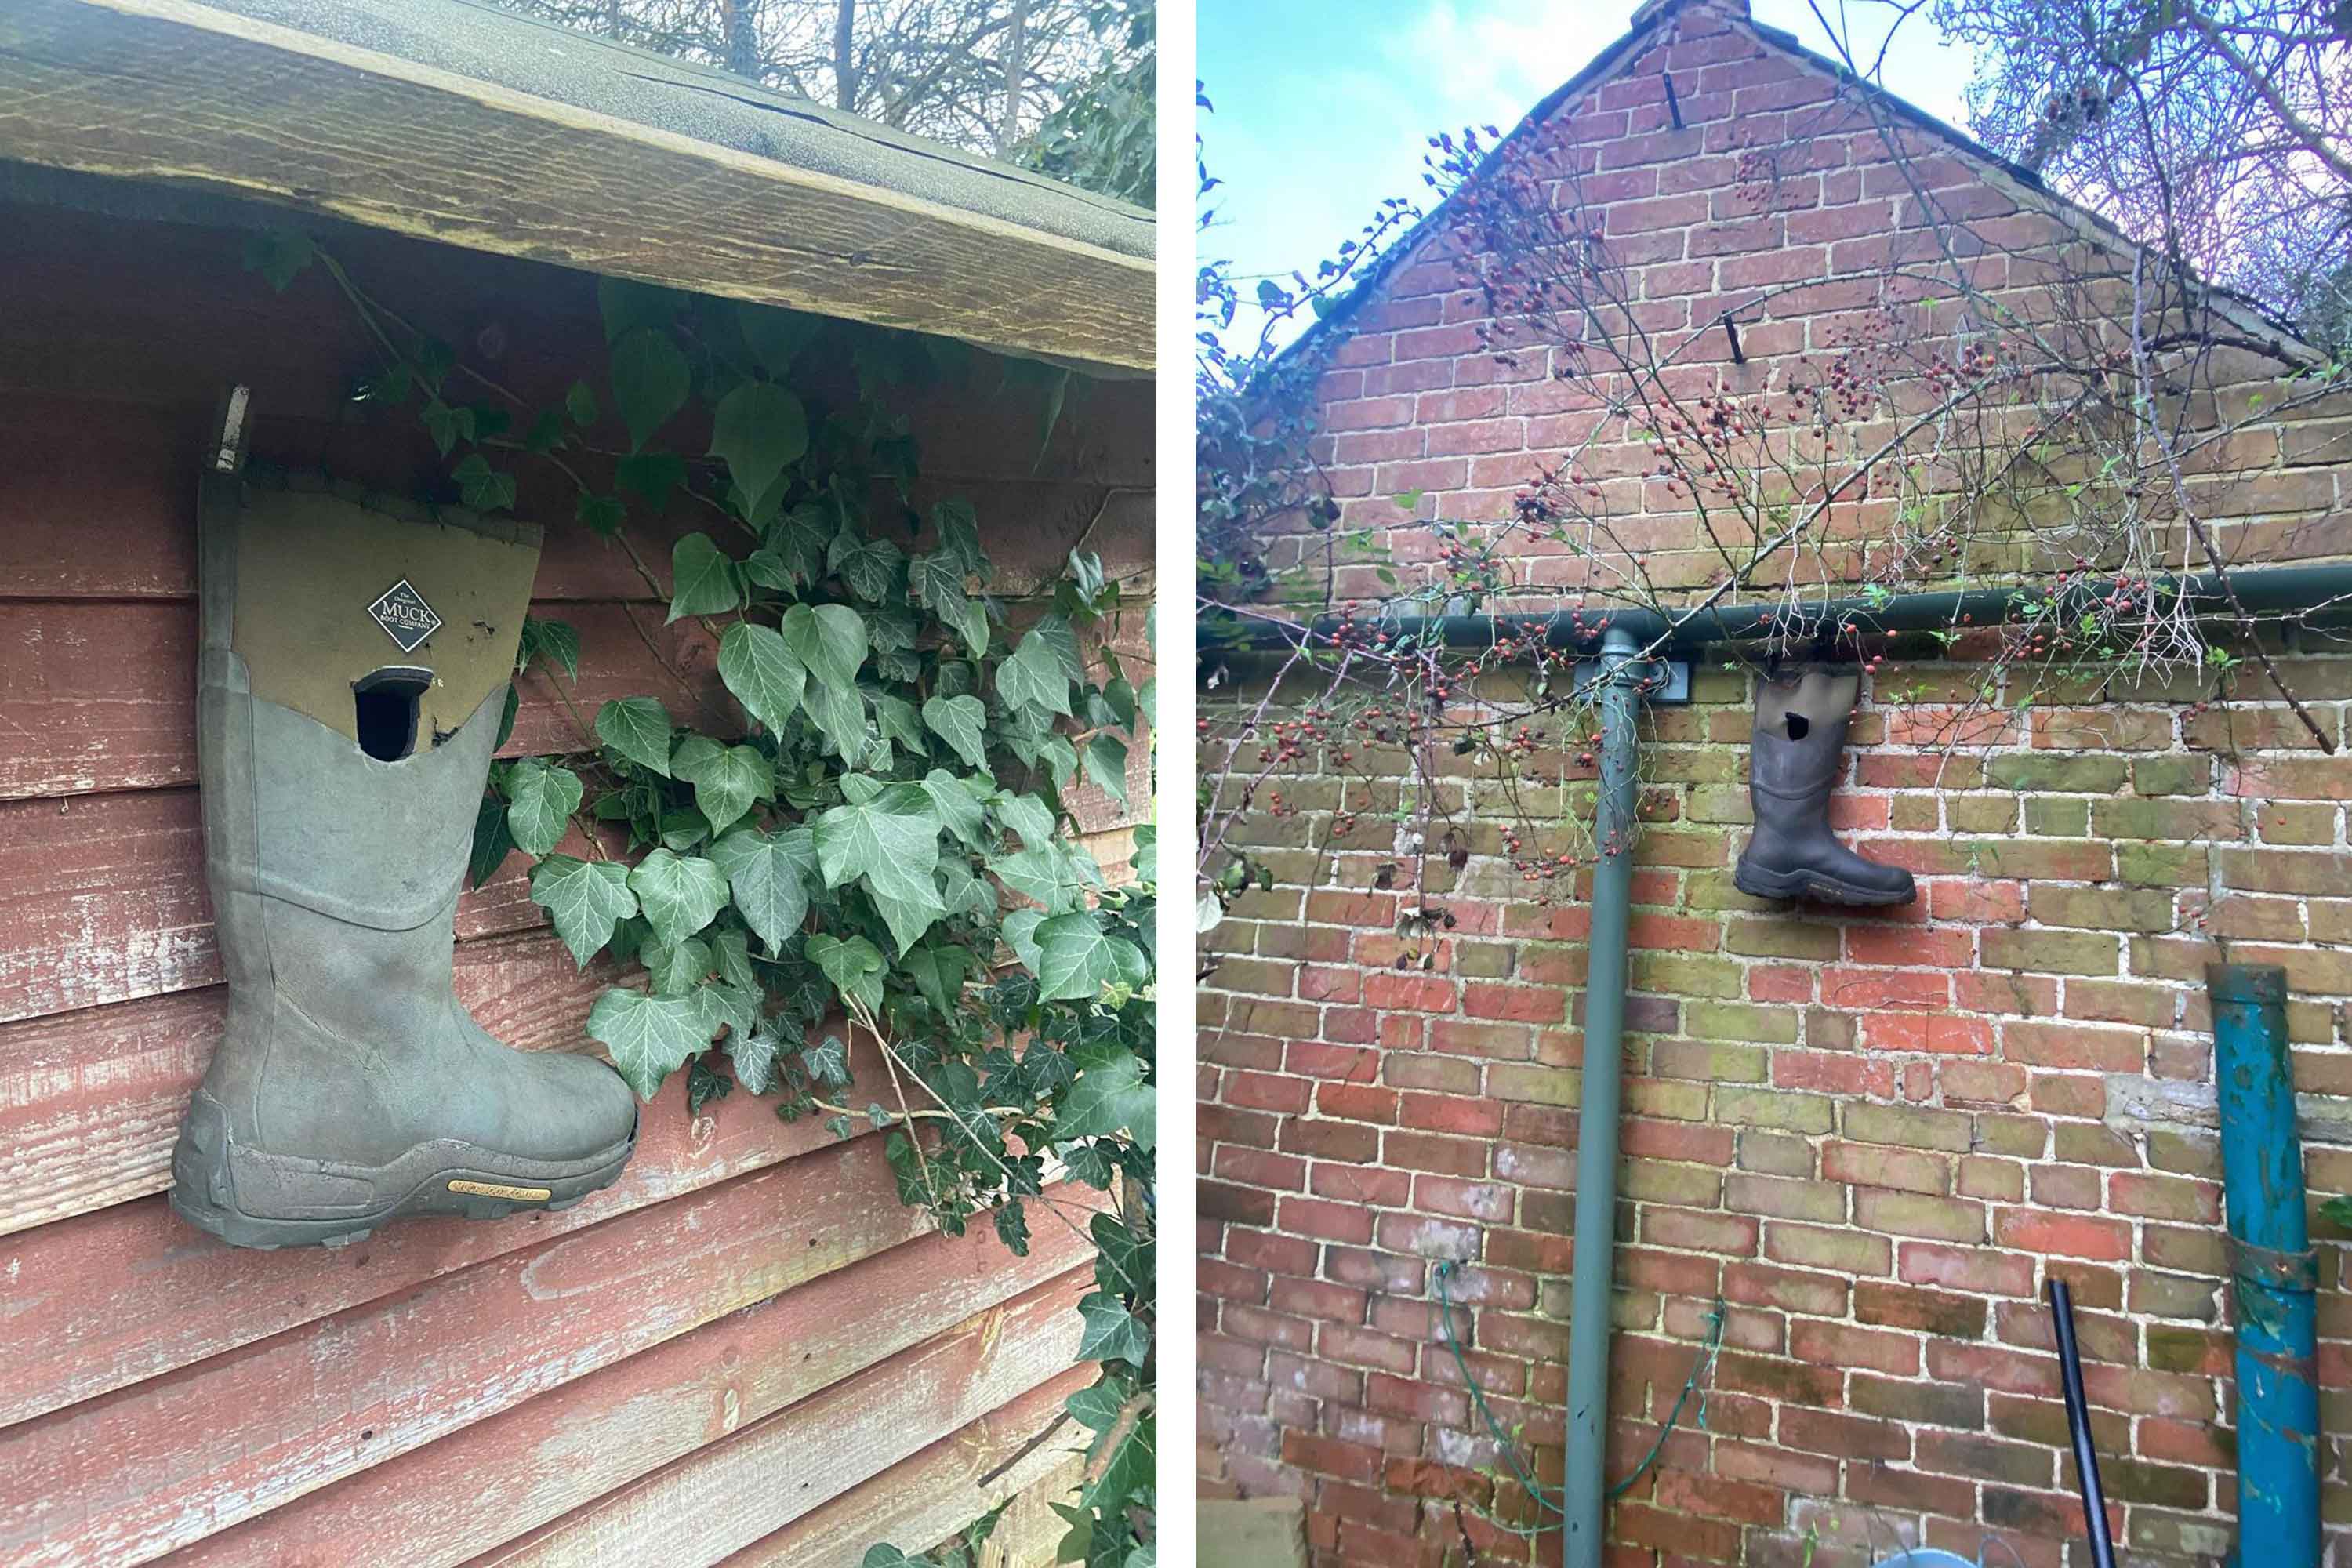 Two images of single Muck Boot wellington hung up as bird feeders, one on a wooden shed and the other on a brick wall